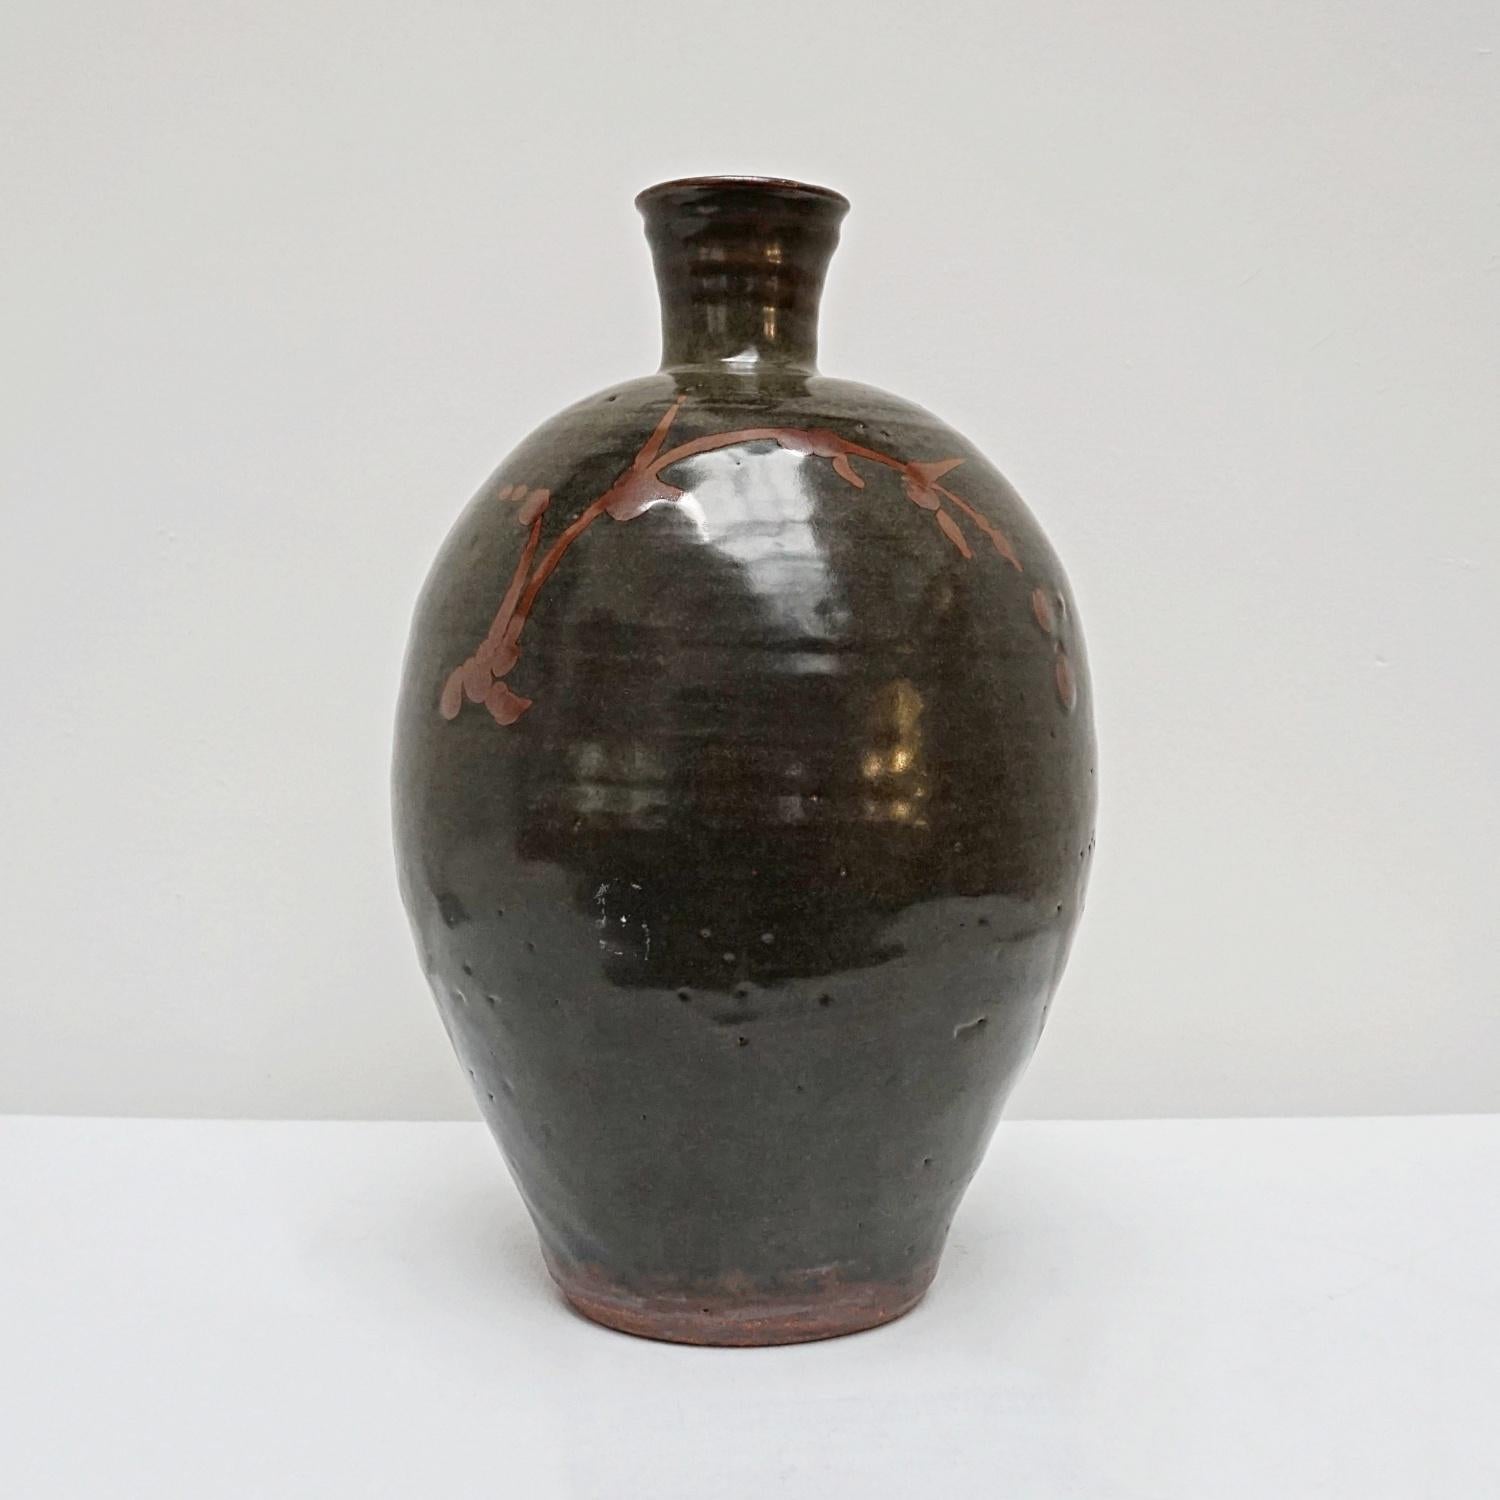 A large black tenmoku glazed stoneware vase with flower motif by William Marshall (1923-2007). 

Dimensions: H 37cm

Origin: English

Date: Circa 1960.

Williams Marshall (1823-2007) was an English studio potter. His life with clay began in 1934